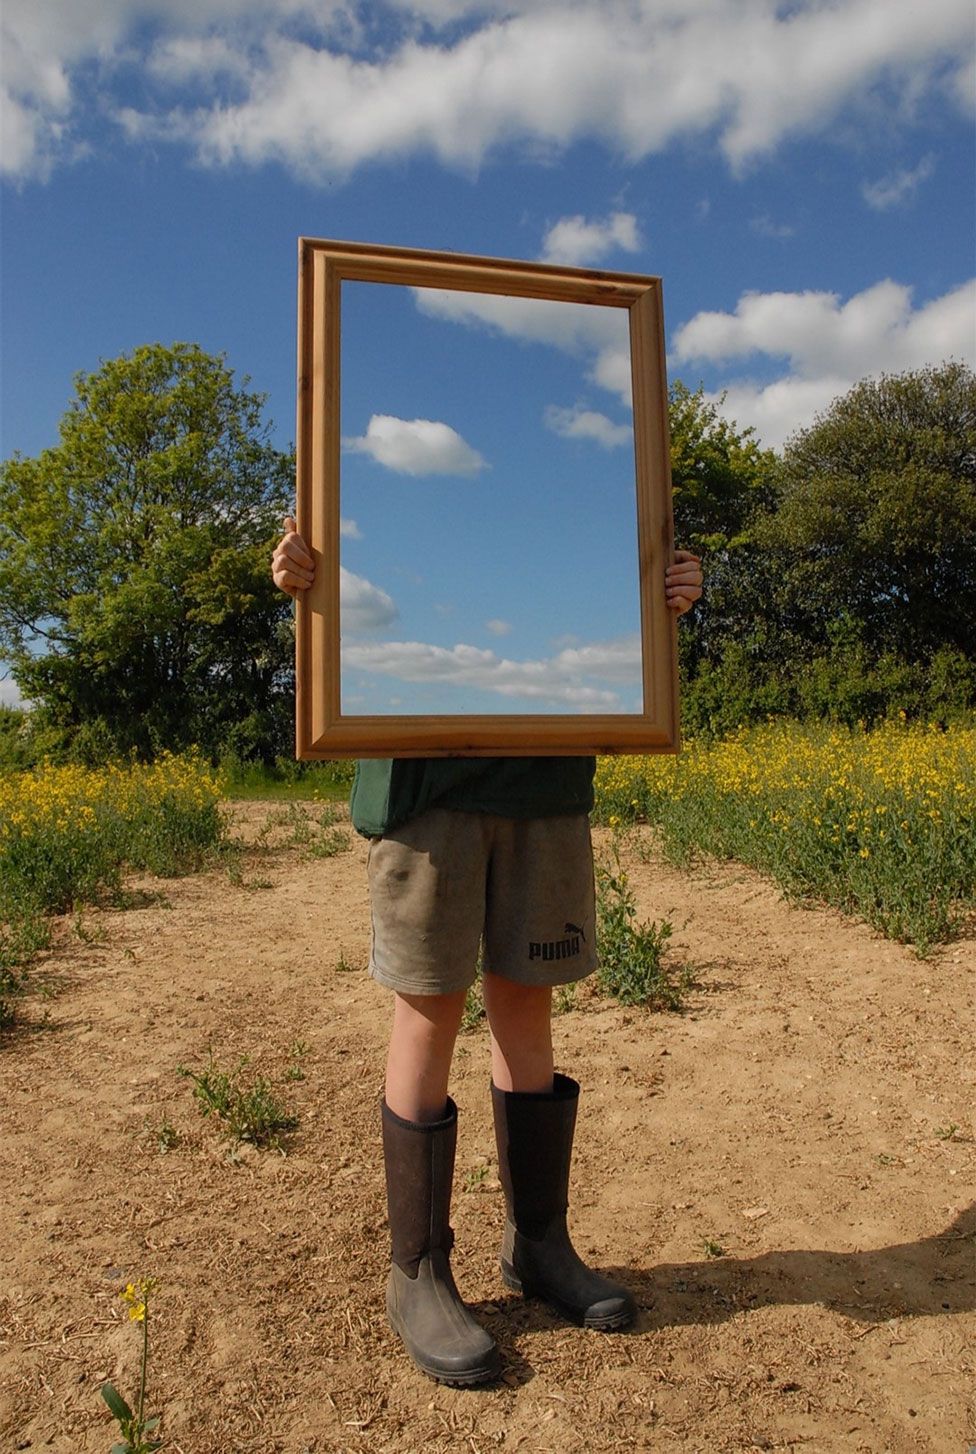 A person stands in a field and holds a mirror showing the sky